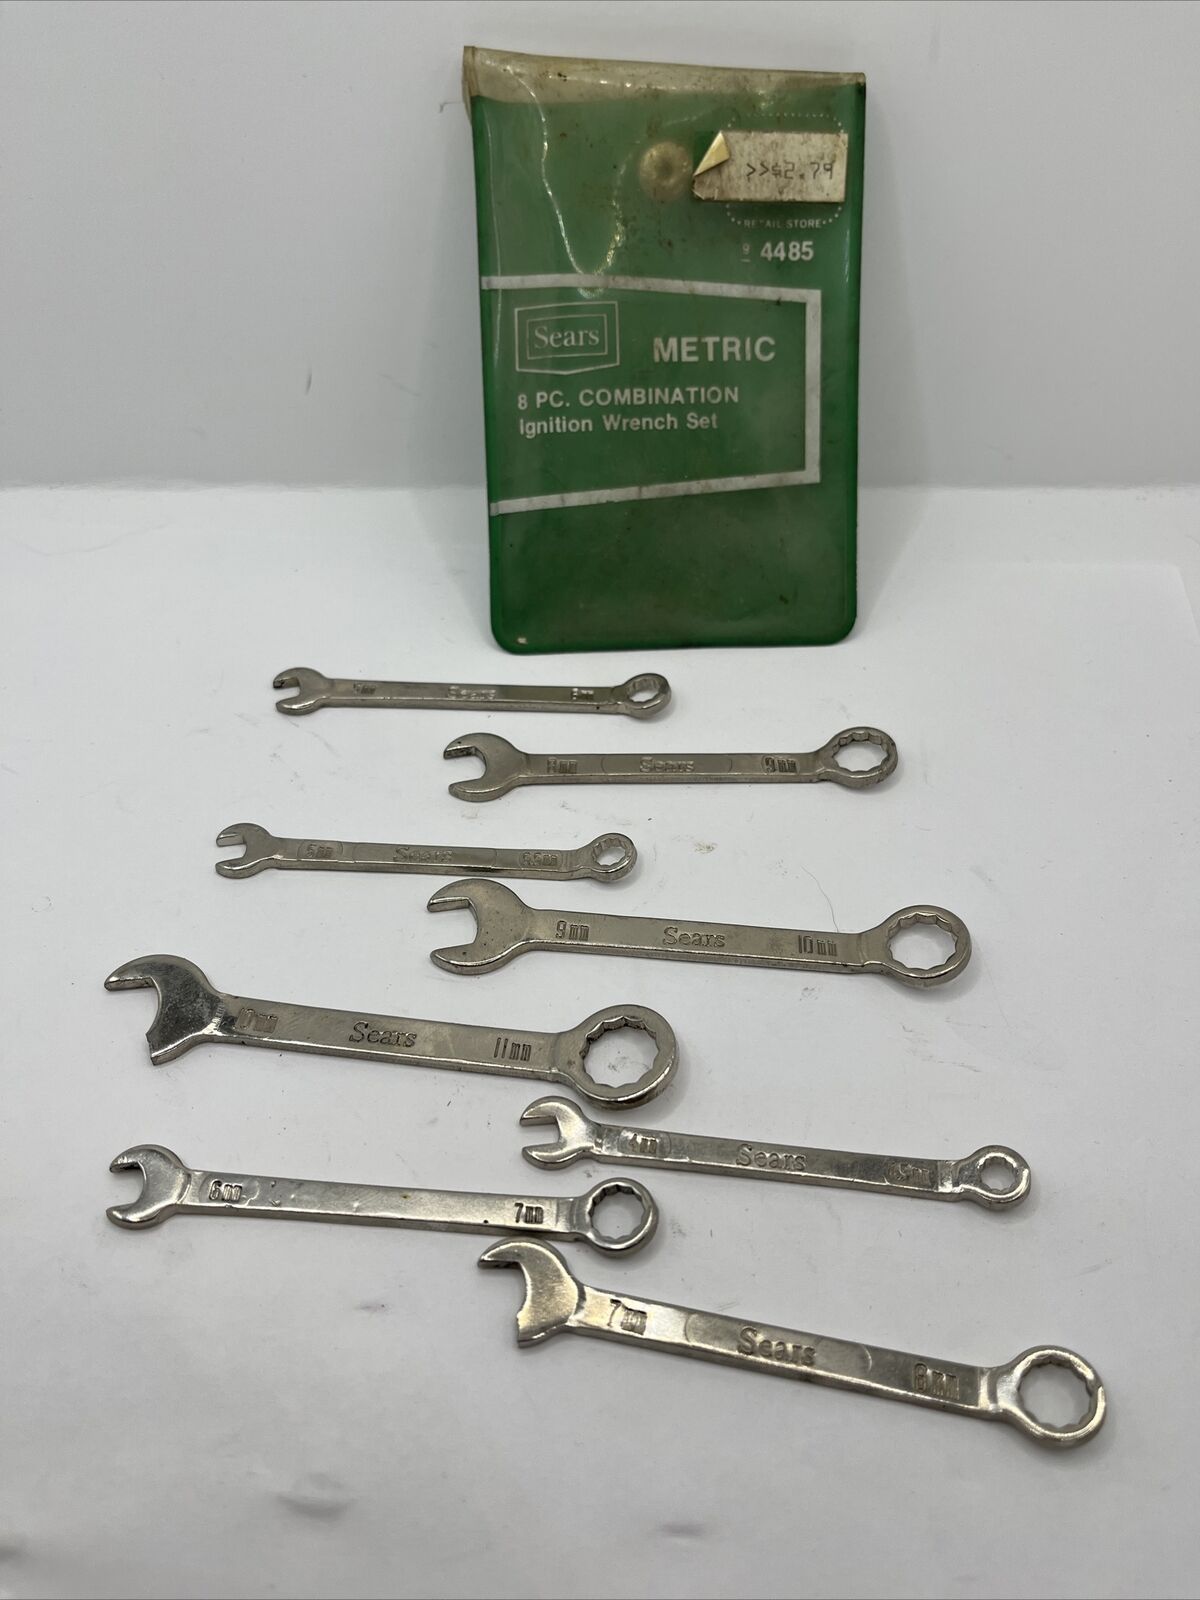 RARE Sears Craftsman 9 4485 Metric Combination Ignition Wrench Set 8Piece